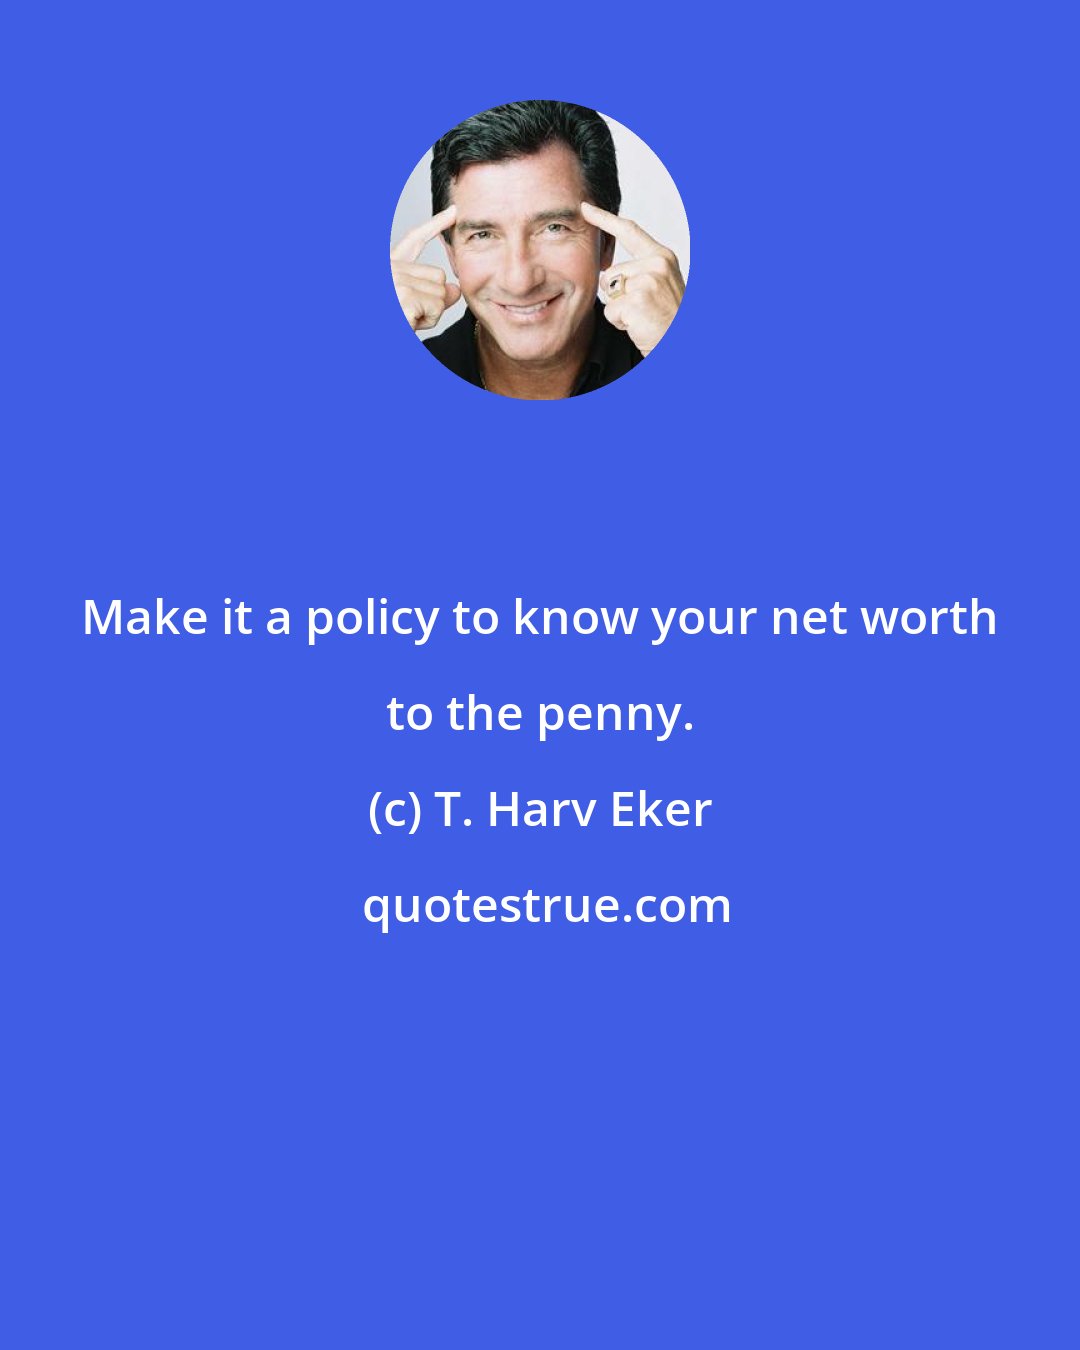 T. Harv Eker: Make it a policy to know your net worth to the penny.